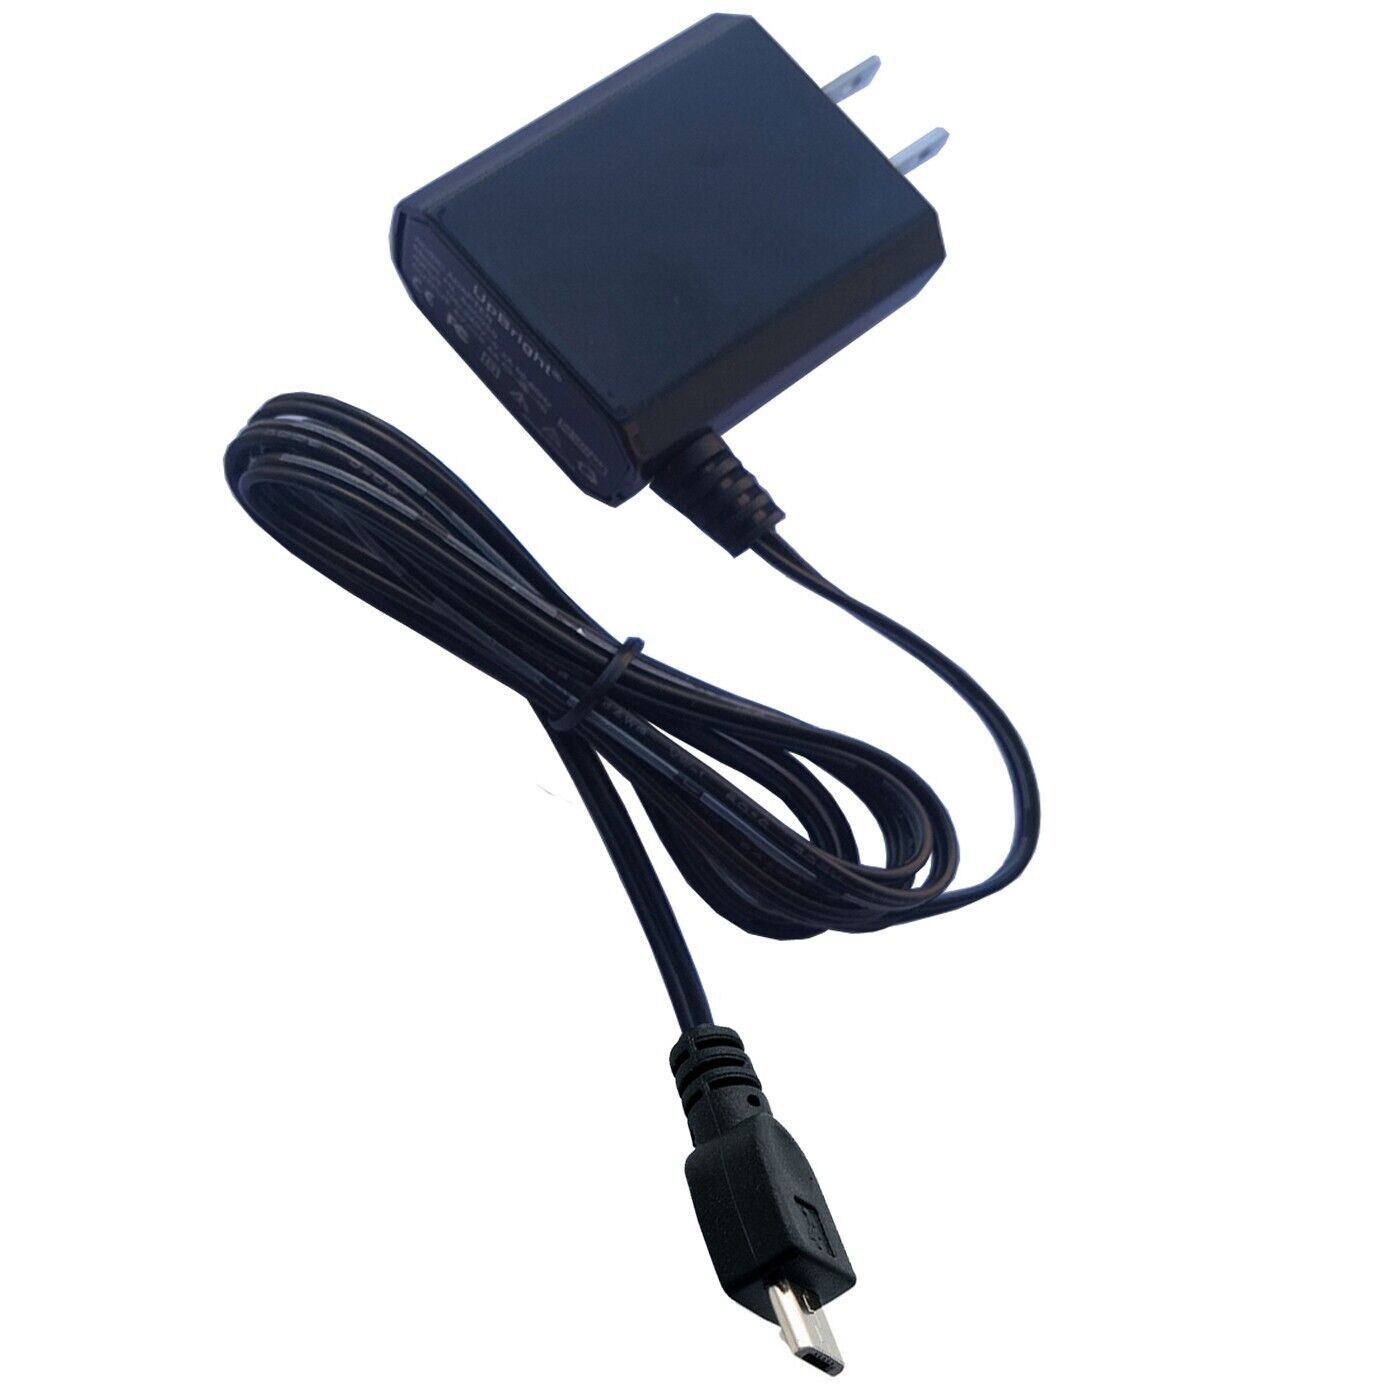 AC Adapter For Lylting ‎P70 ‎P50 ‎P70-6 ‎LED Flashlights Spotlight Searchlight Compatible Brand For Lylting Type AC/DC